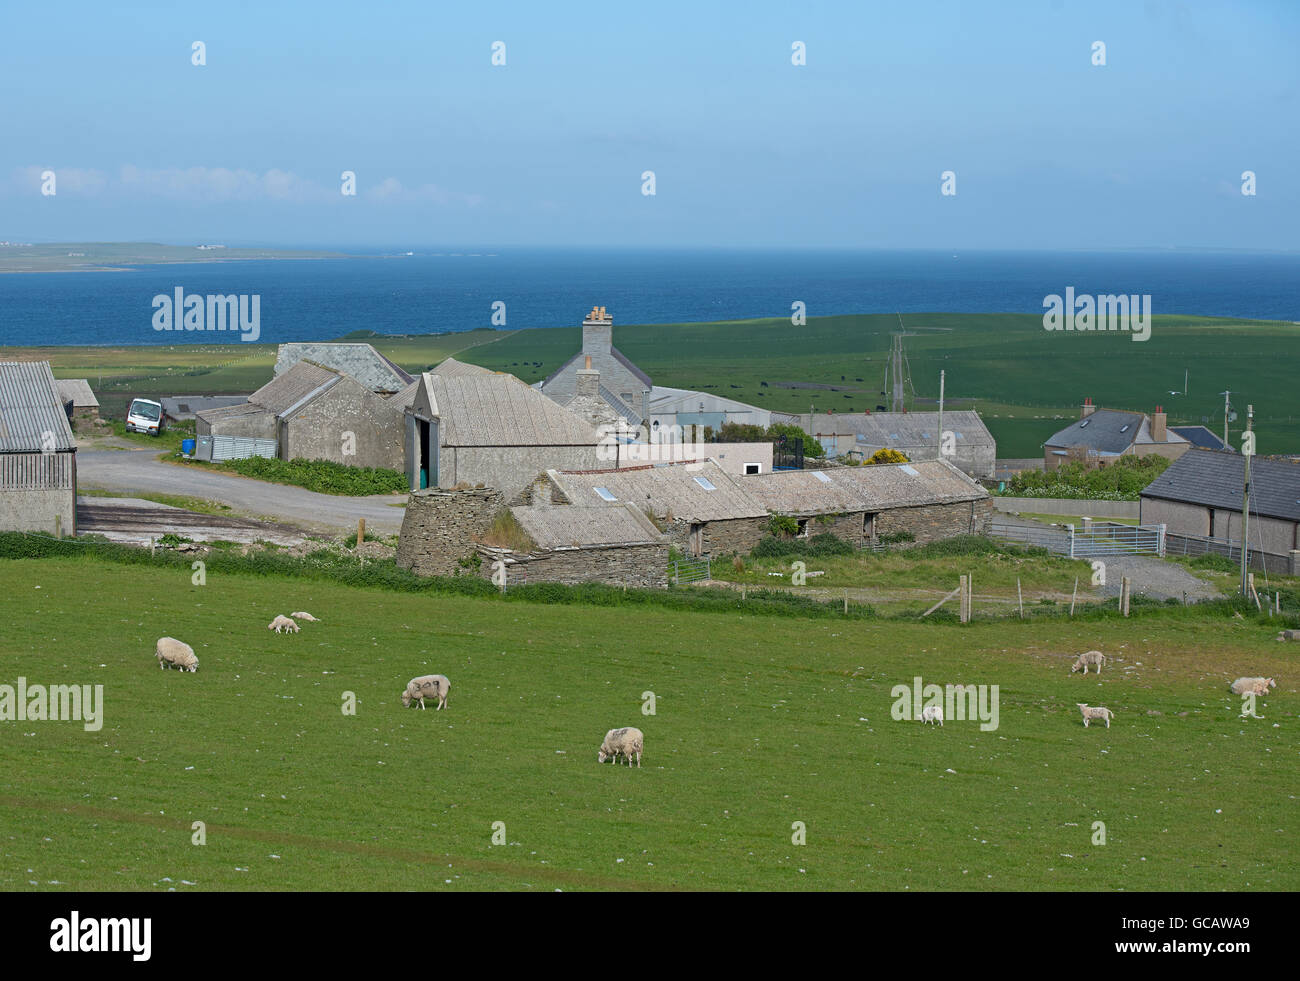 The open treeless agricultural landscape of the Orkney Isles. Stock Photo